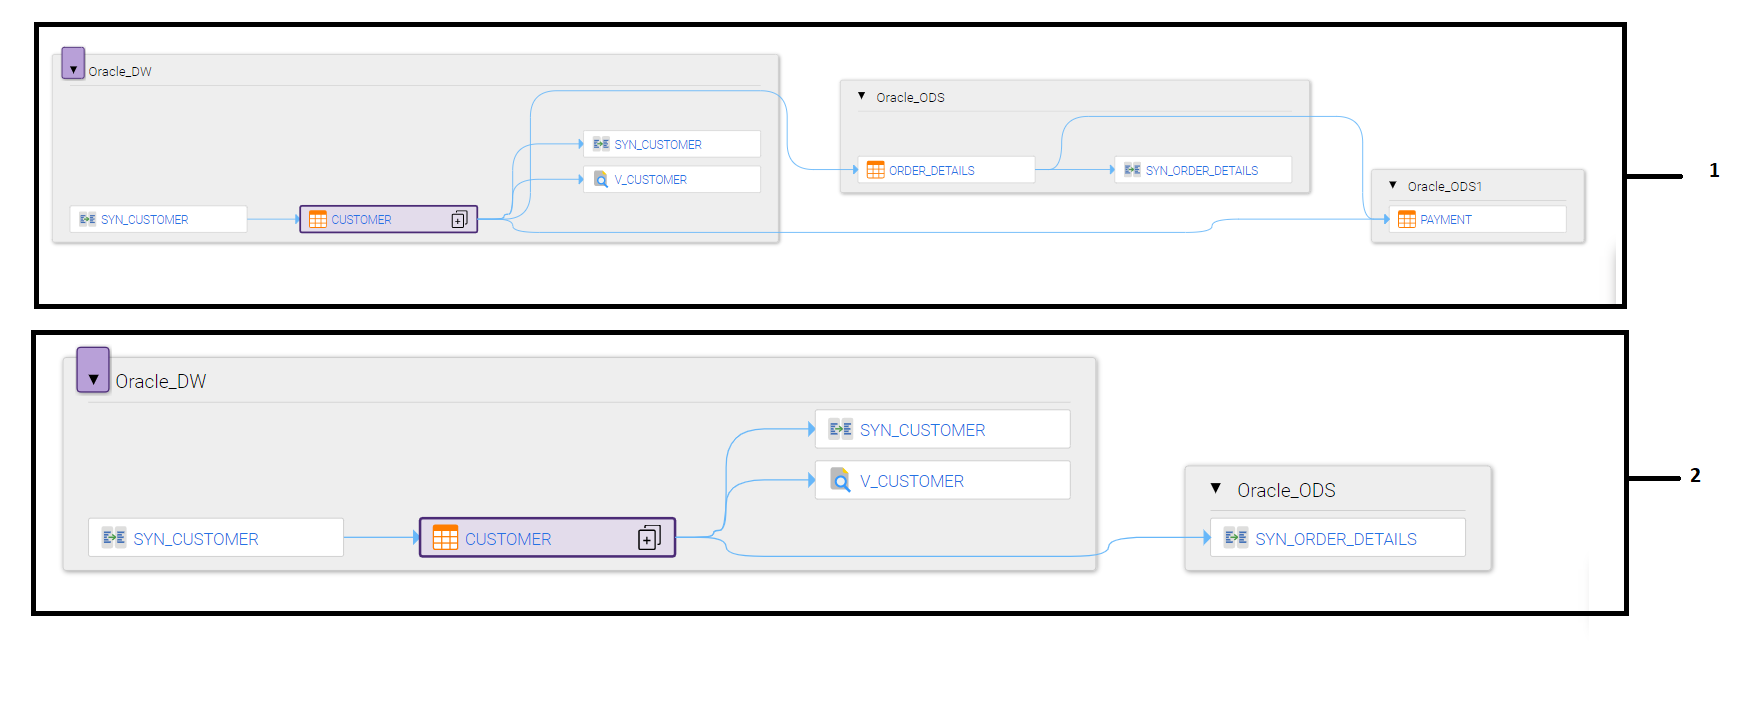 The image displays the comparison between the diagram views after you apply the Hide assets and retain their links filter option.